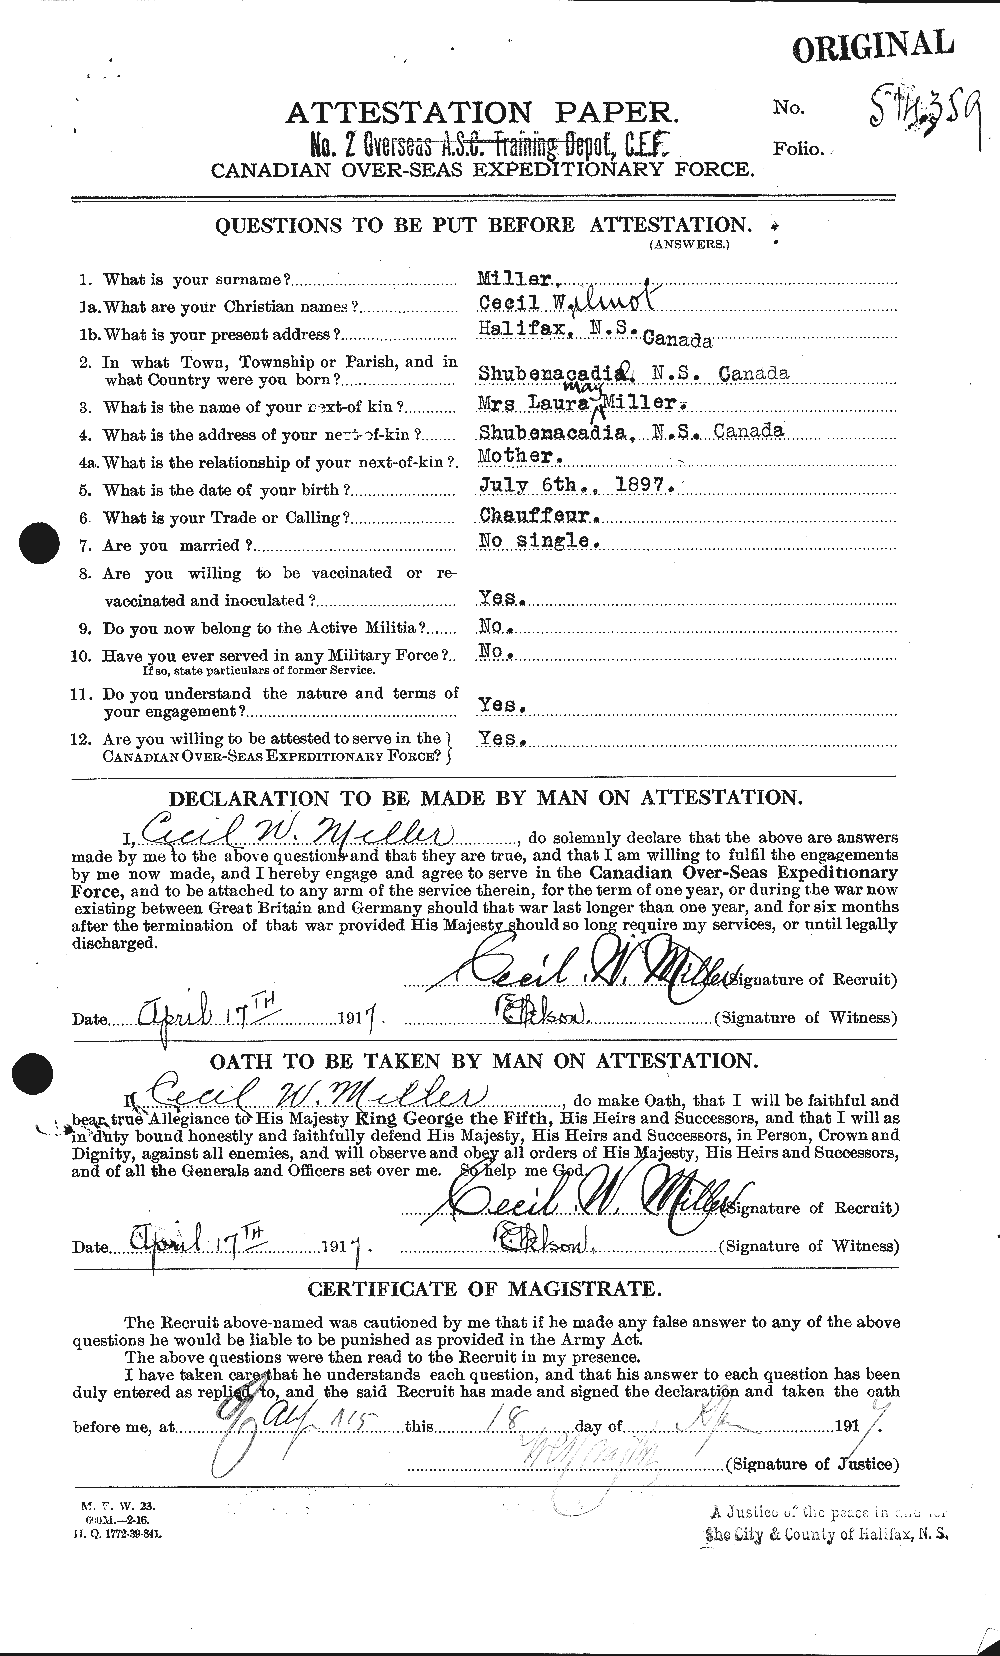 Personnel Records of the First World War - CEF 498777a